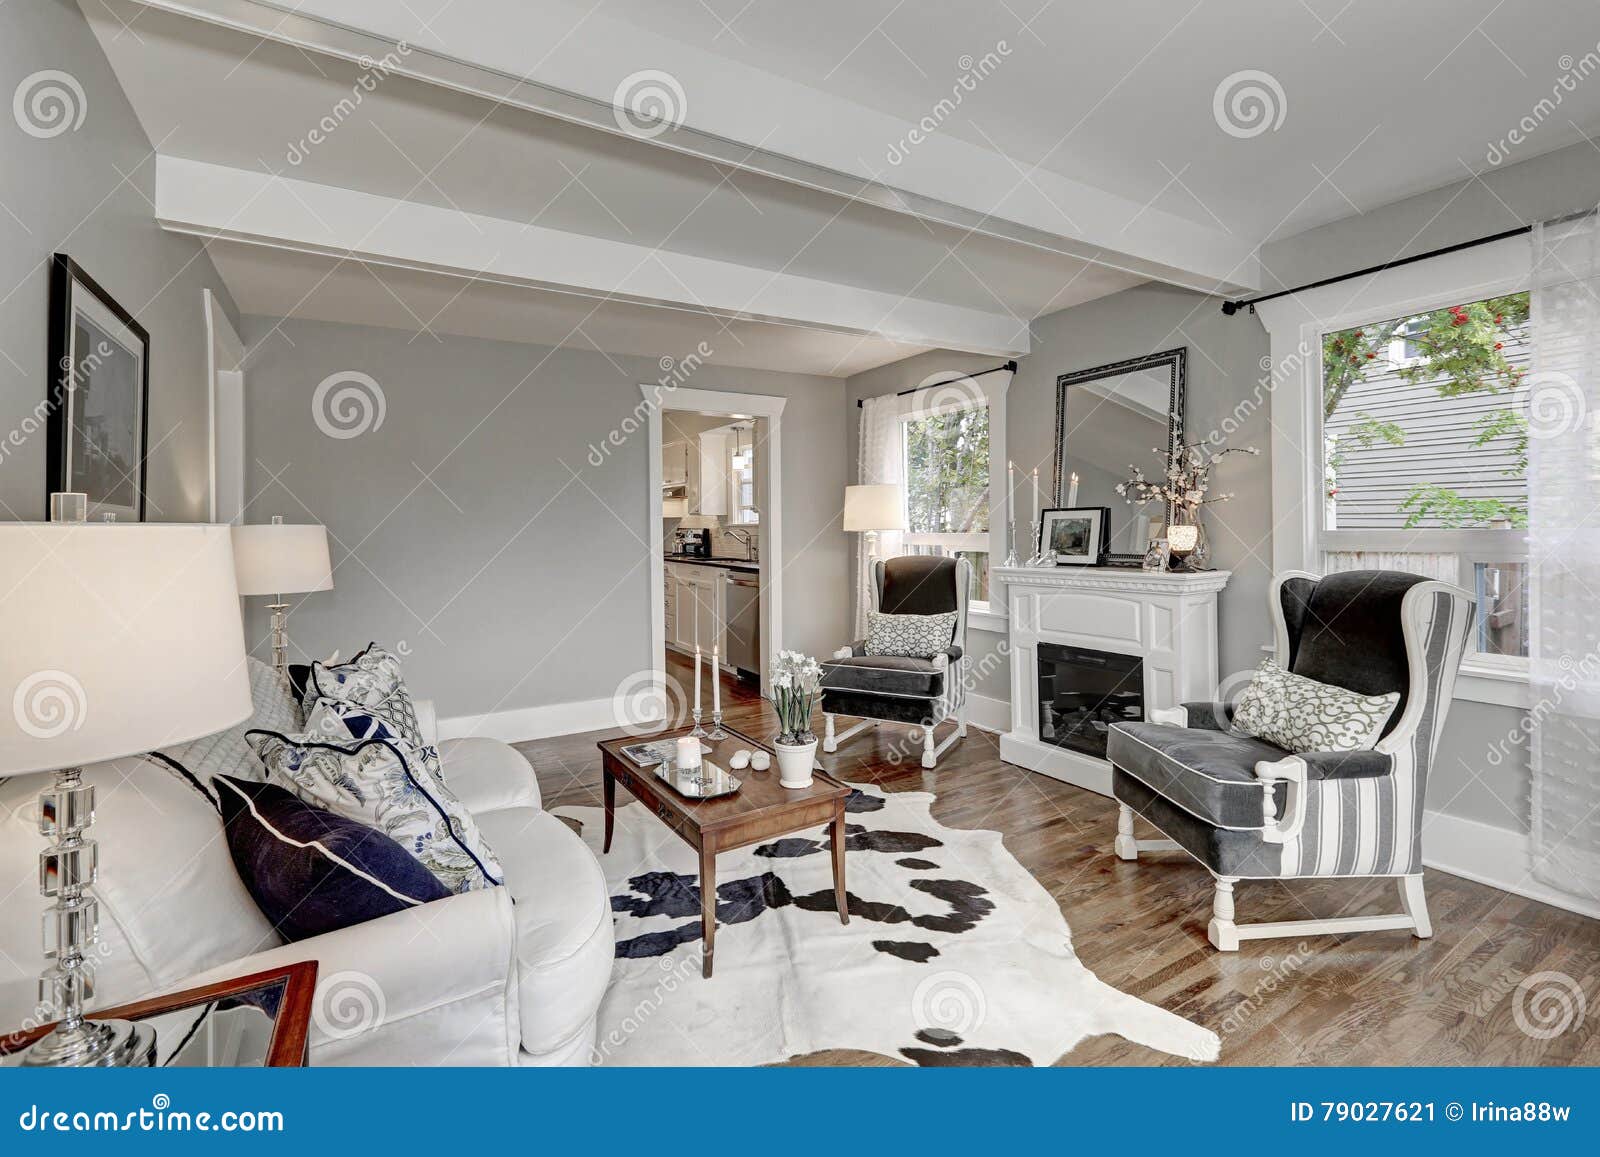 Black And White Interior Of Luxury Living Room Stock Image Image